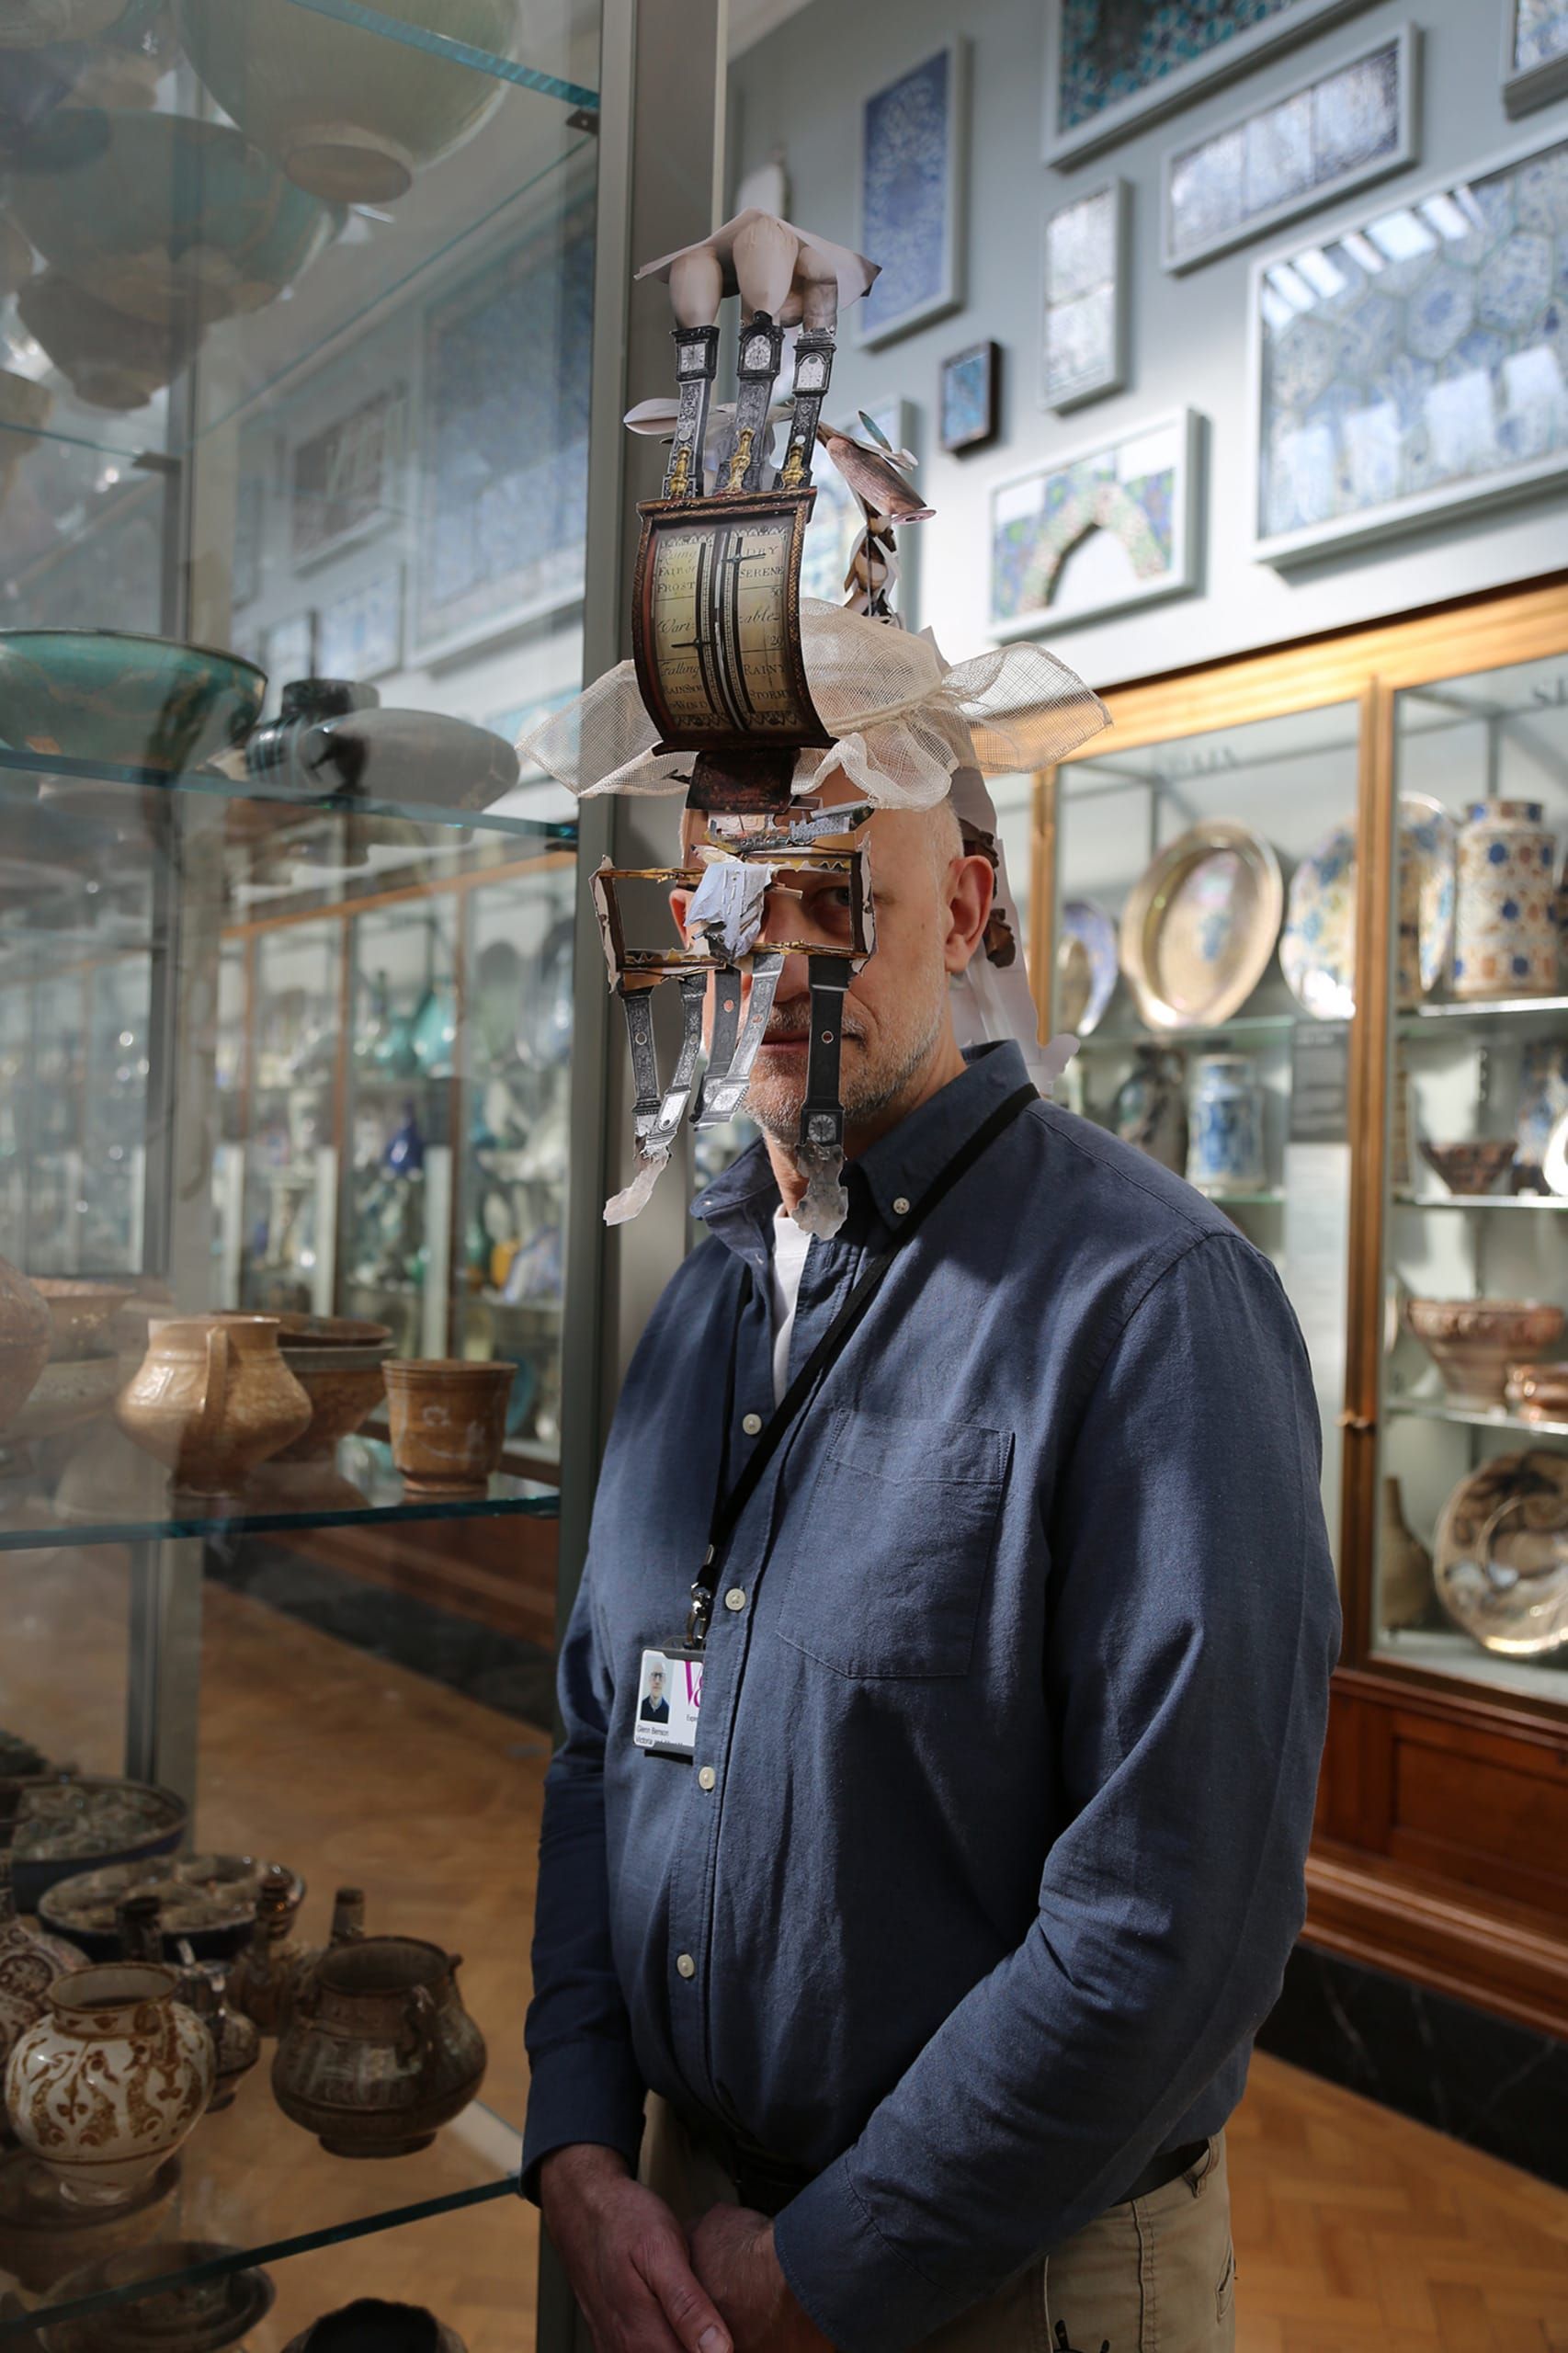 A worker from the V&A stands in one of the museum rooms wearing a headpiece made from a collage of printed images of archival objects.